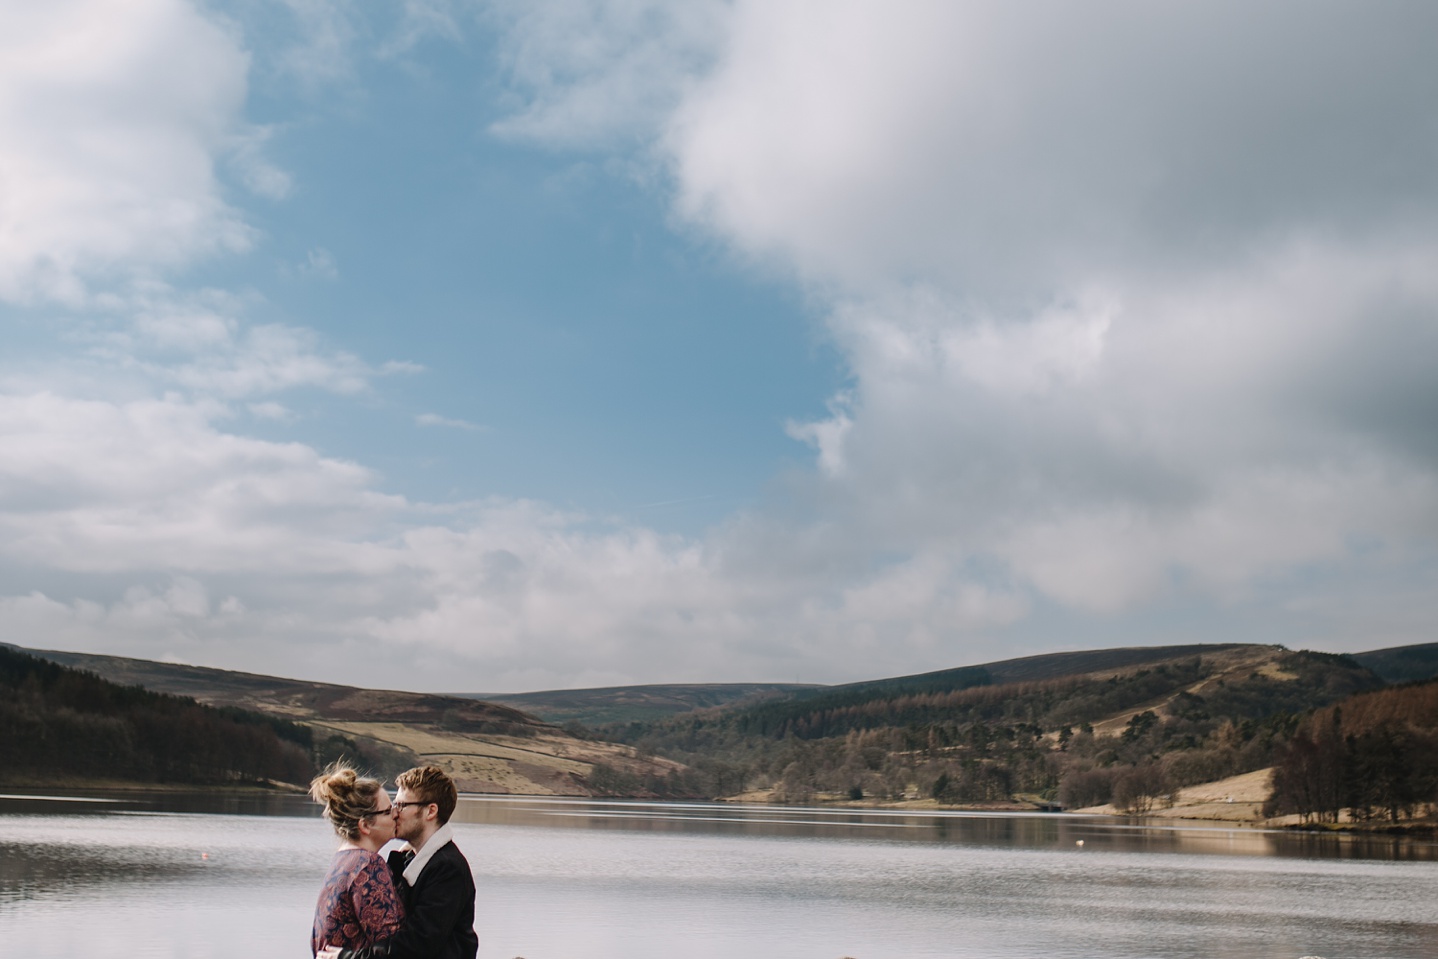 man and woman laughing with Eerwood reservoir in the background